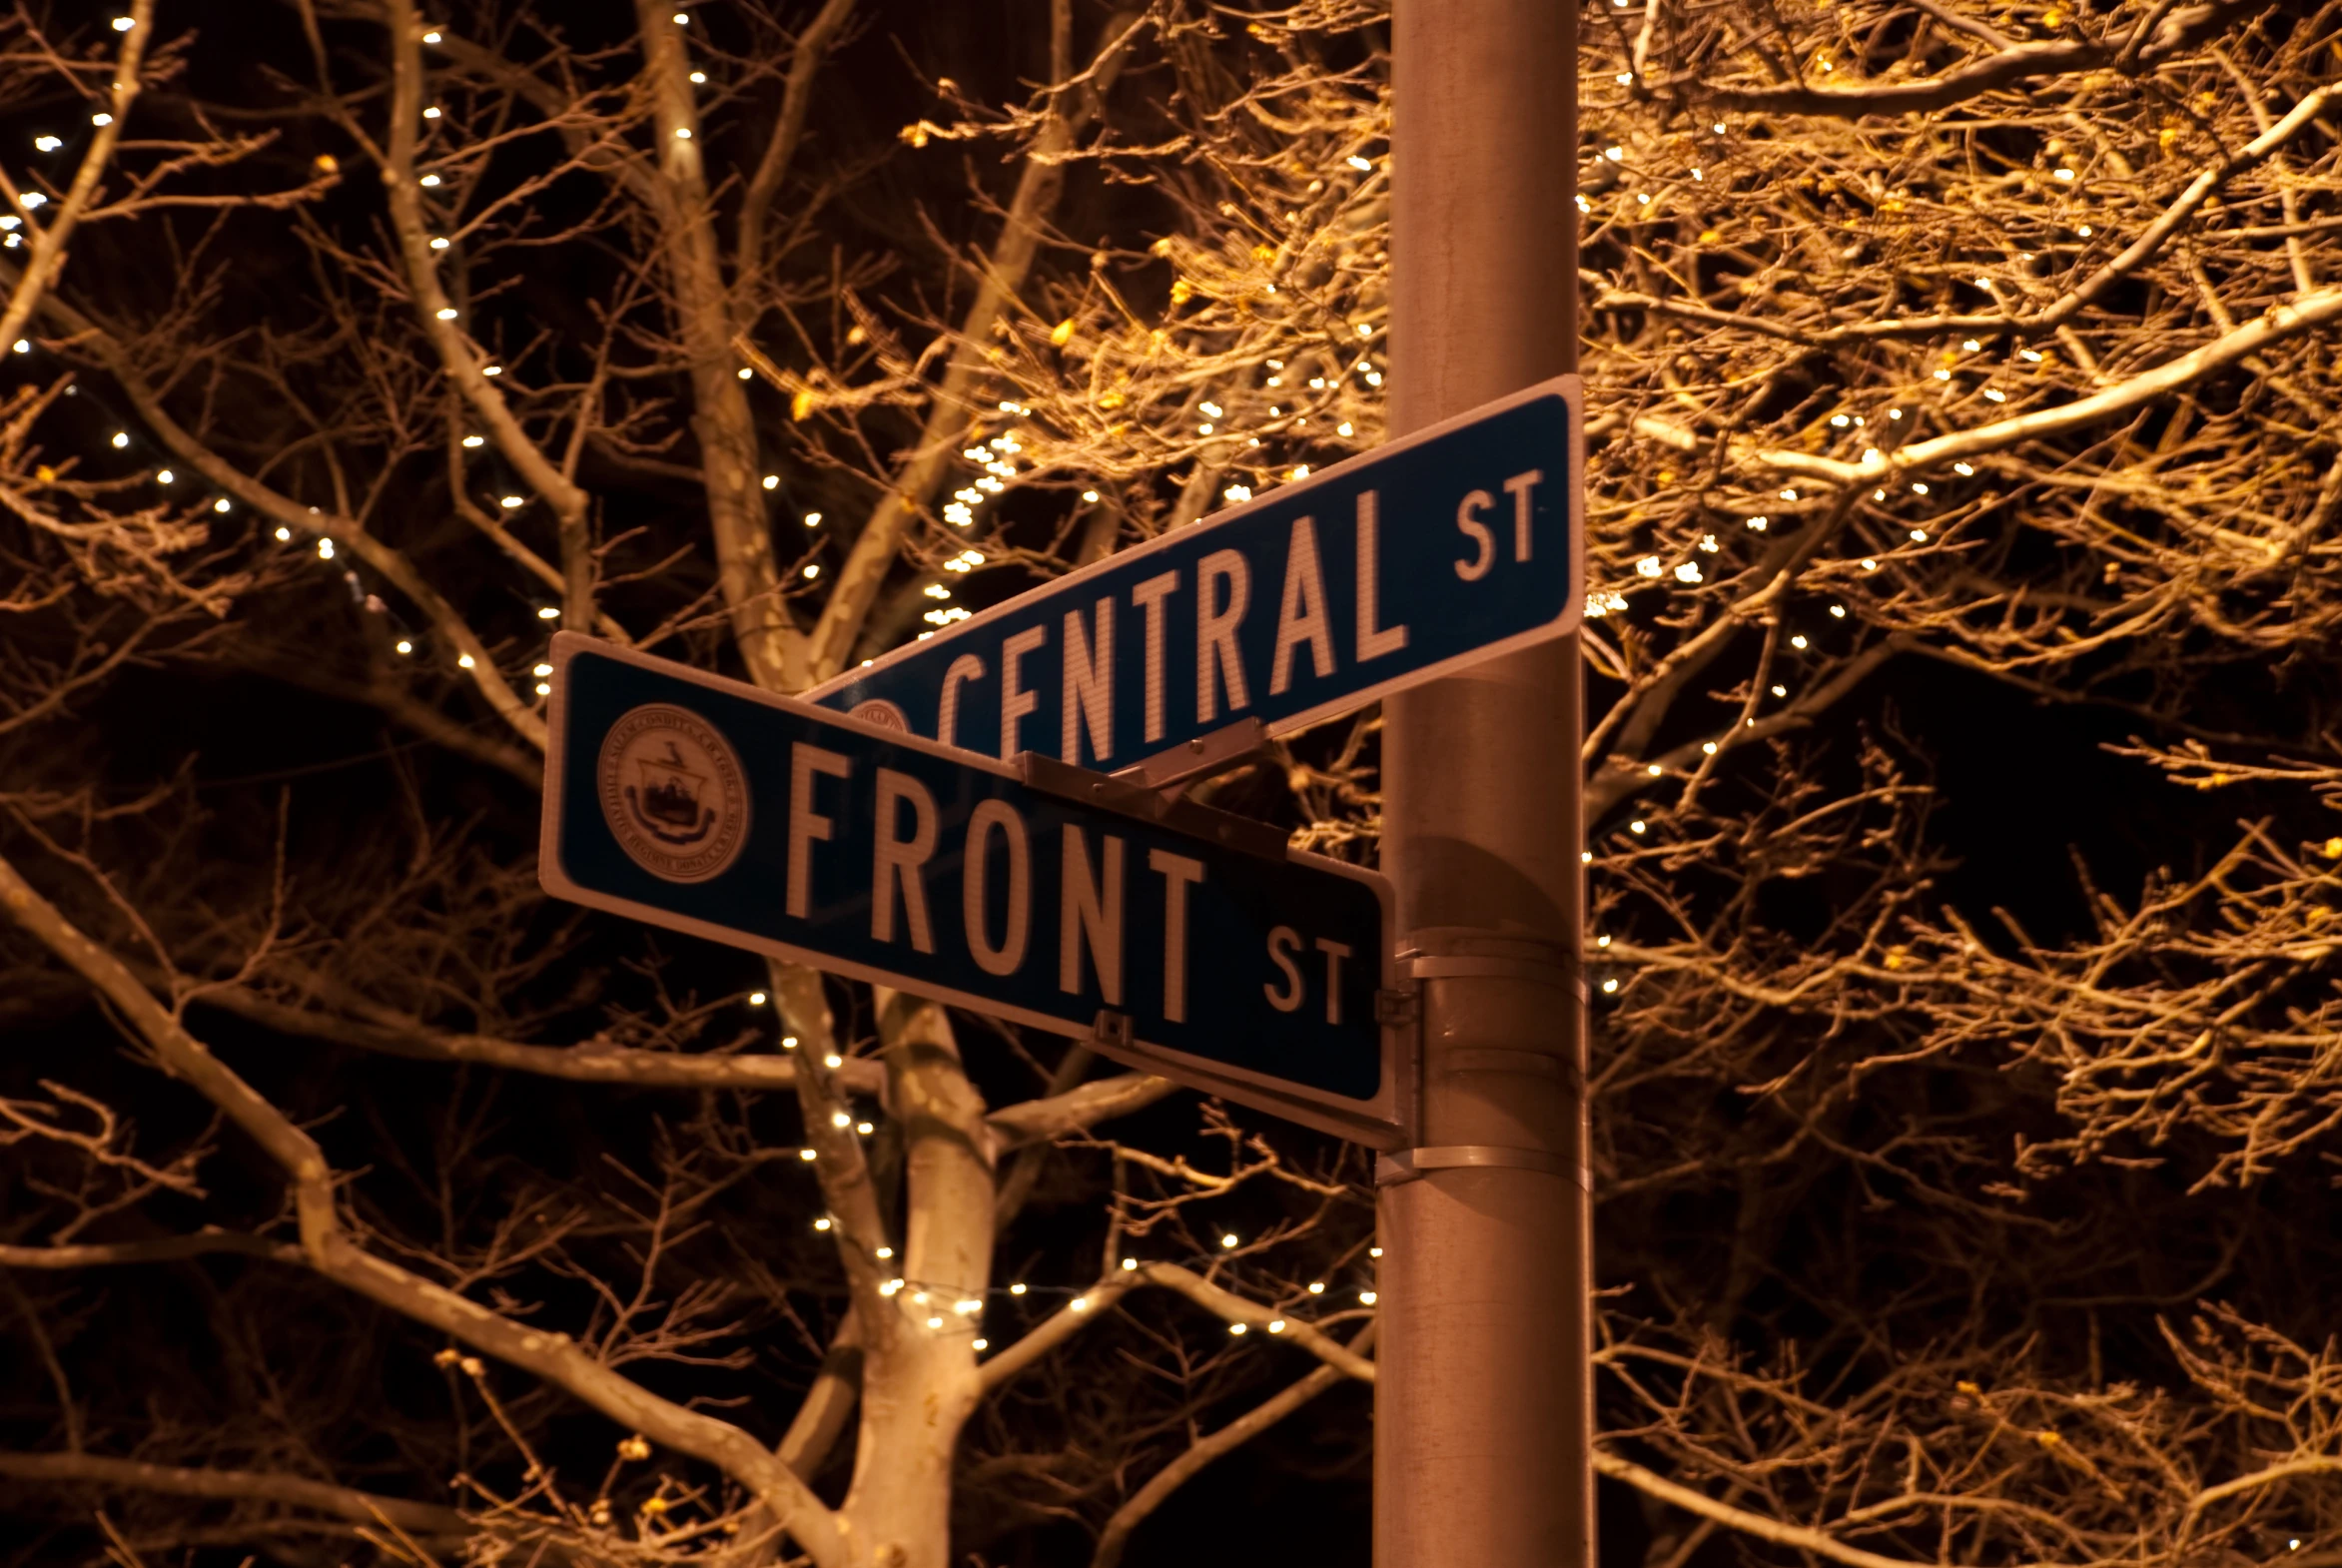 the street signs for central st and front st